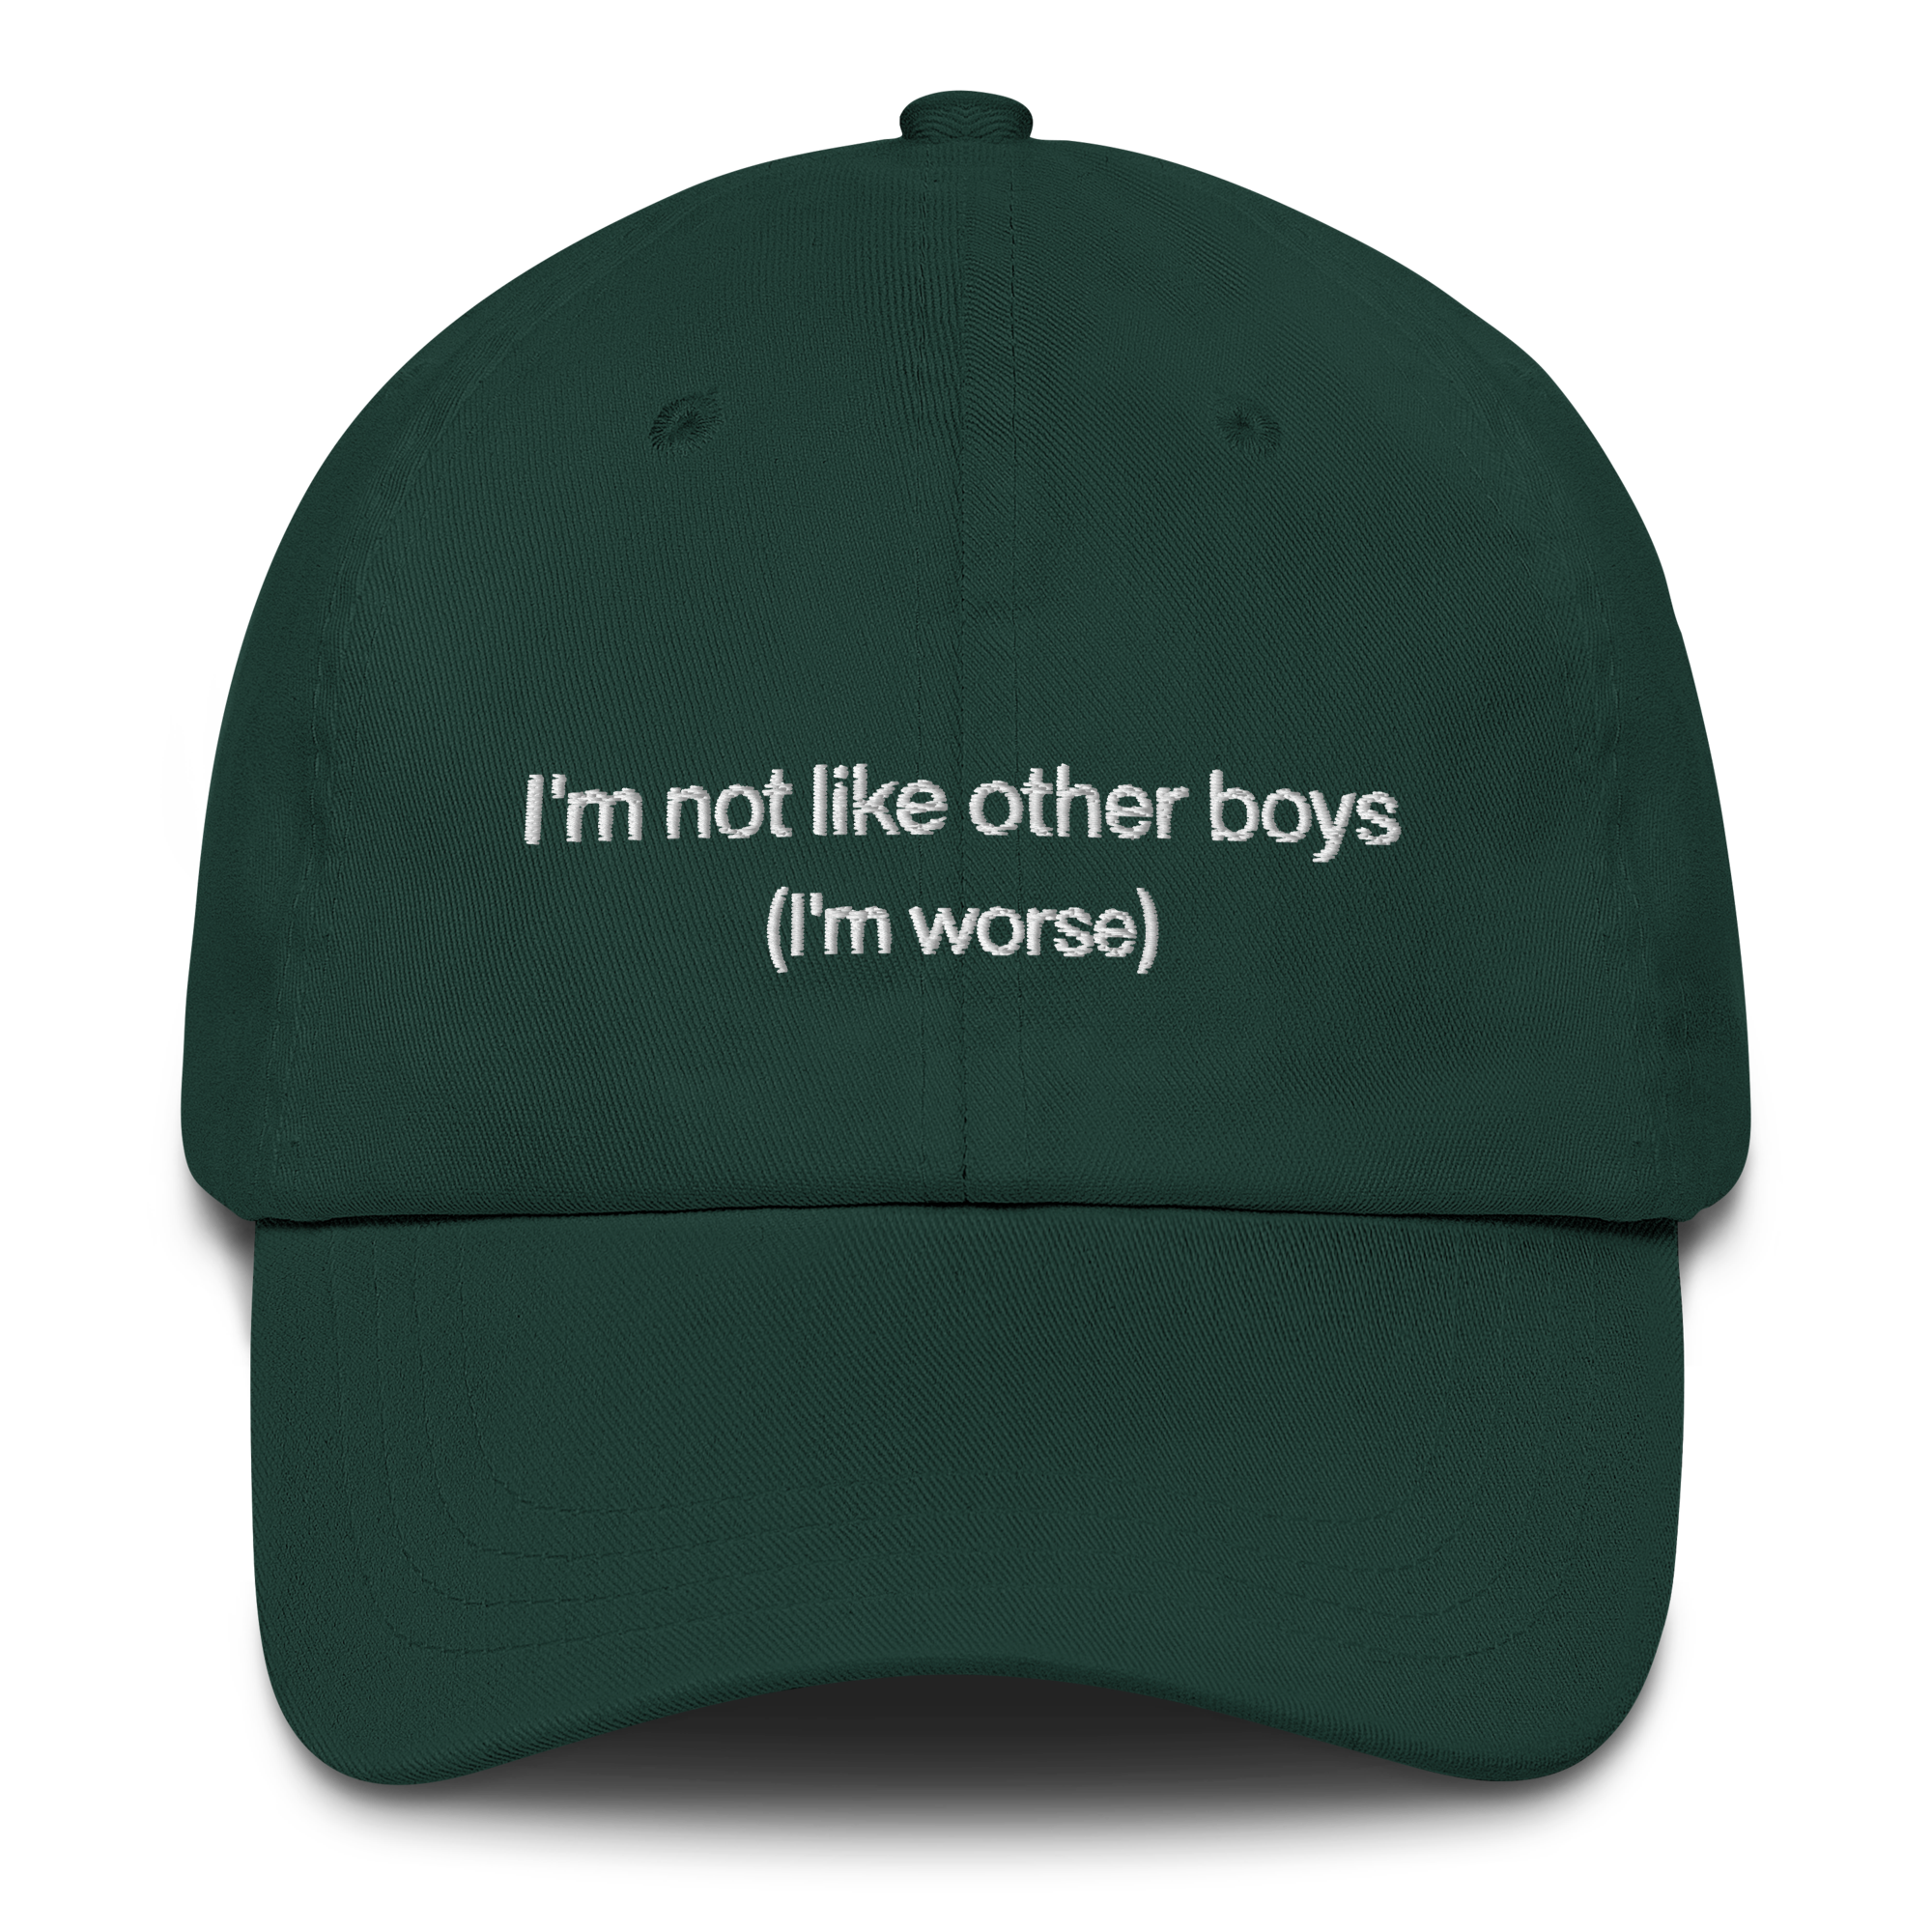 classic-dad-hat-spruce-front-667b1f18b9dc4.png